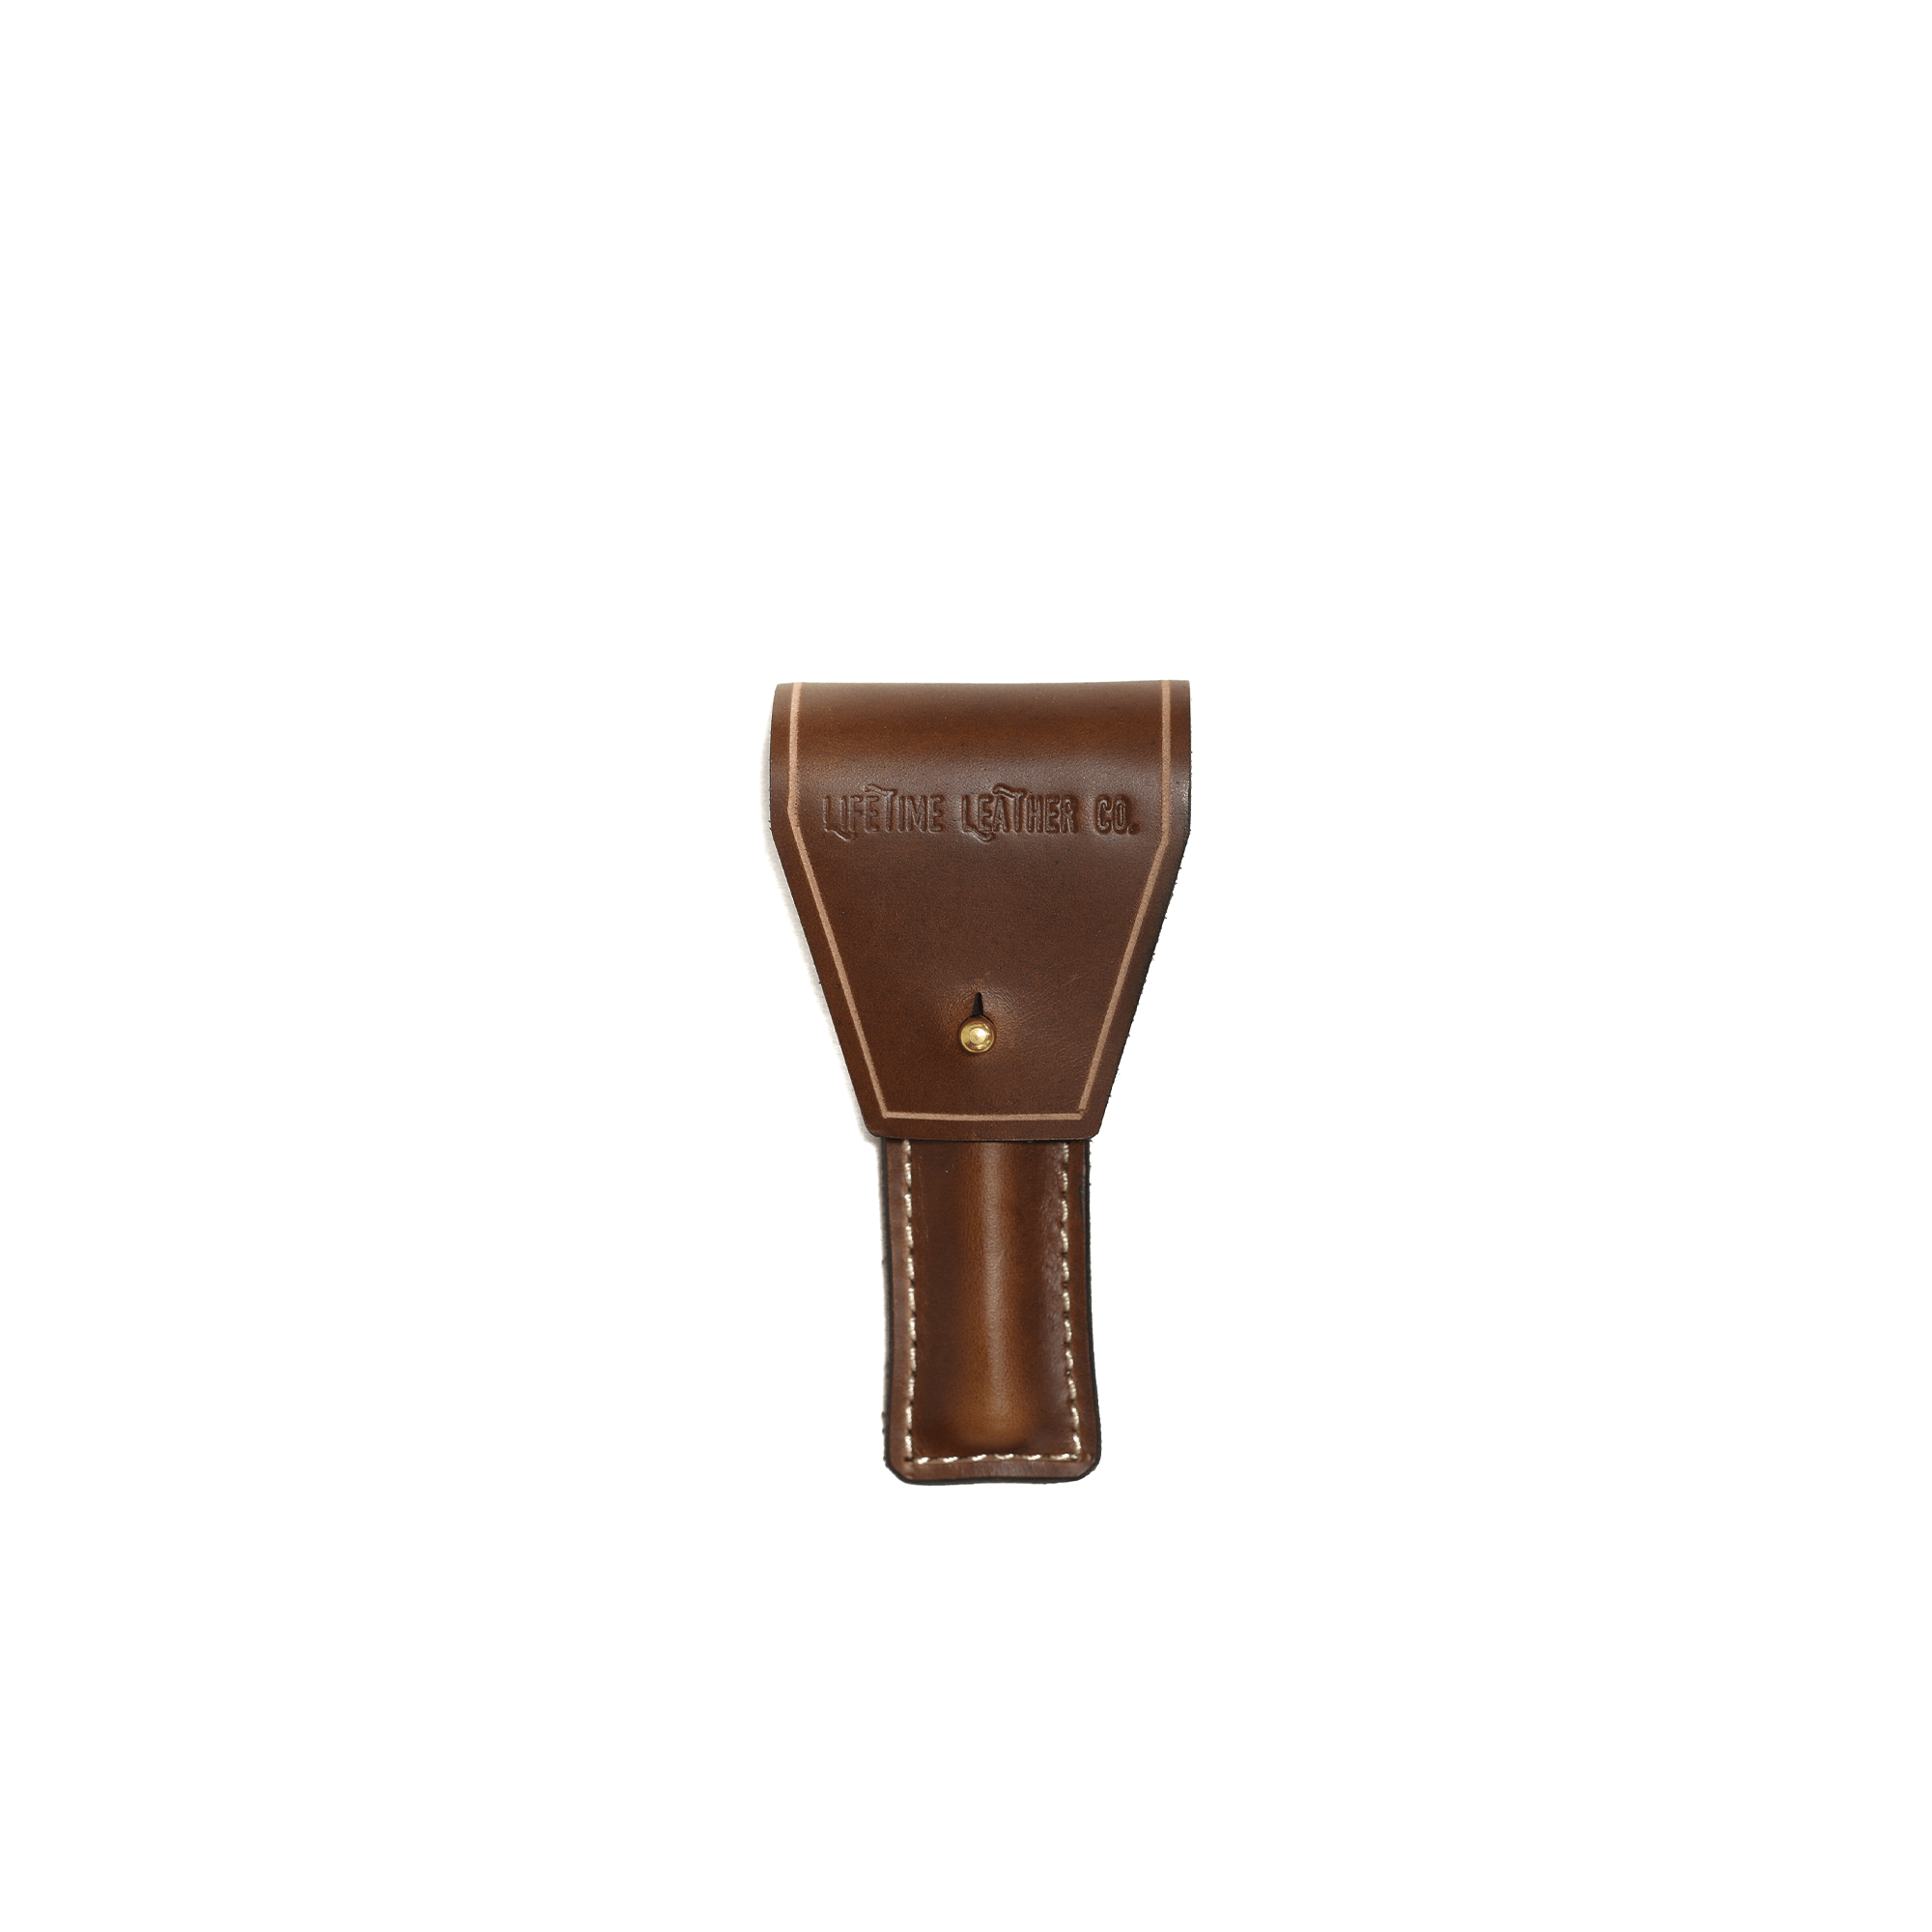  Safety Razor Holder by Lifetime Leather Co Lifetime Leather Co Perfumarie